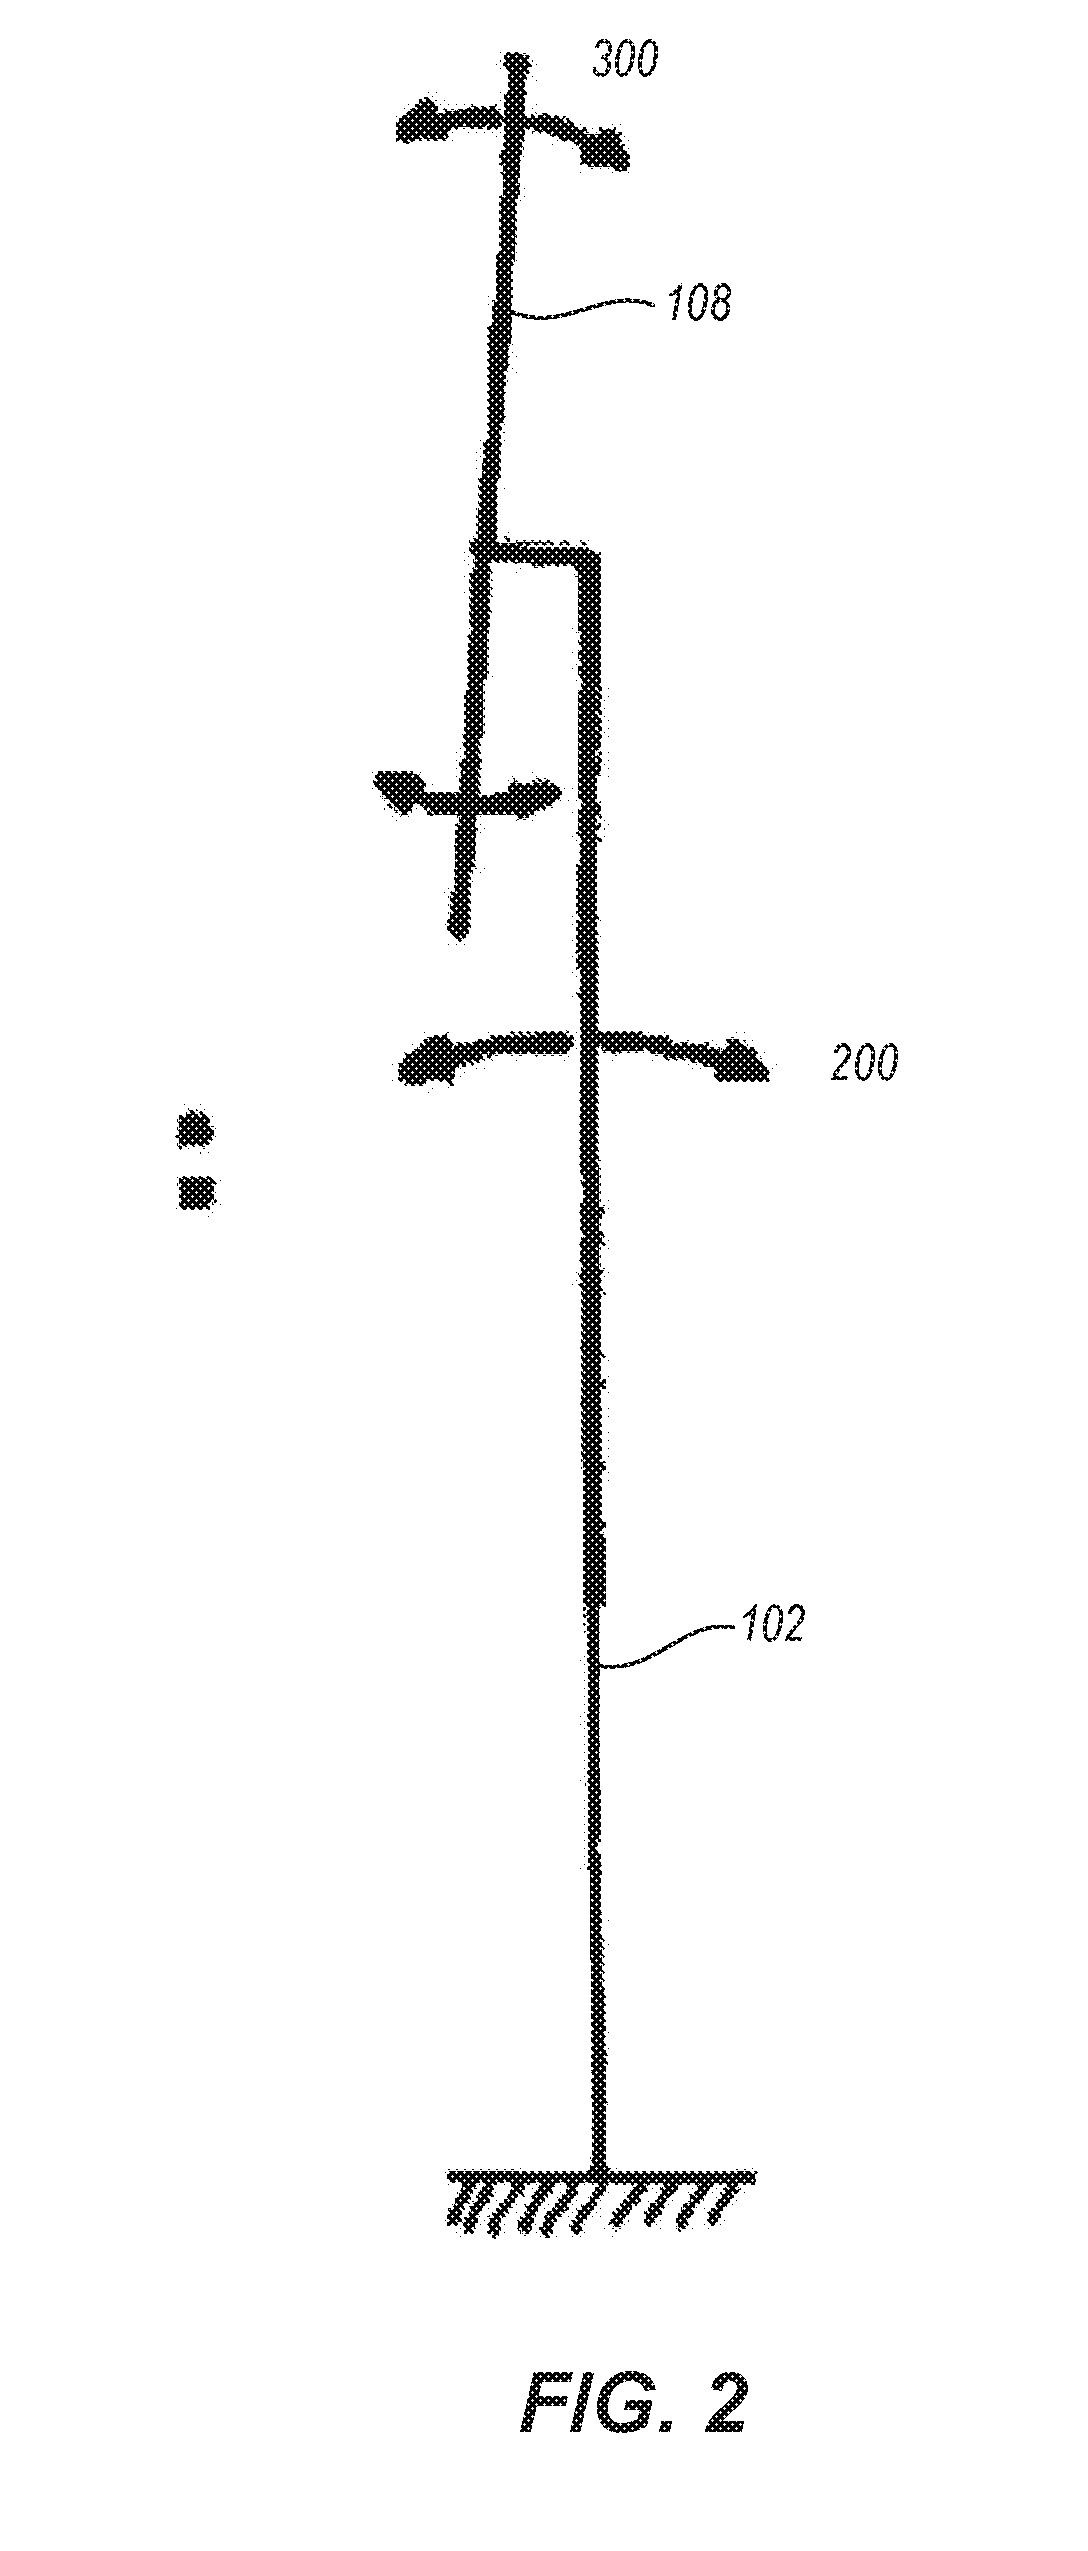 Method for determining the remaining service life of a wind turbine